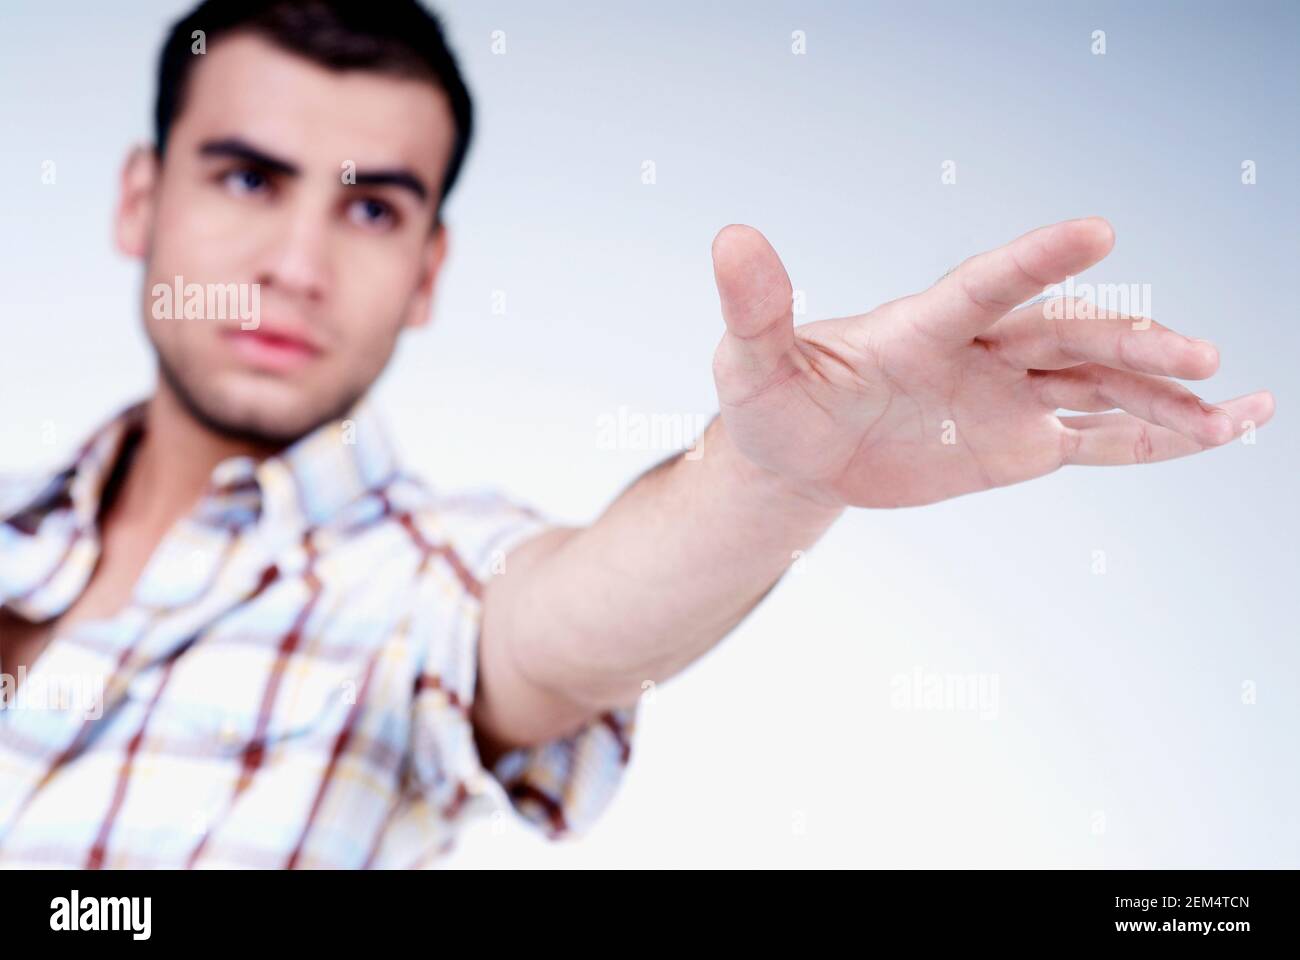 Close-up of a young man gesturing Stock Photo